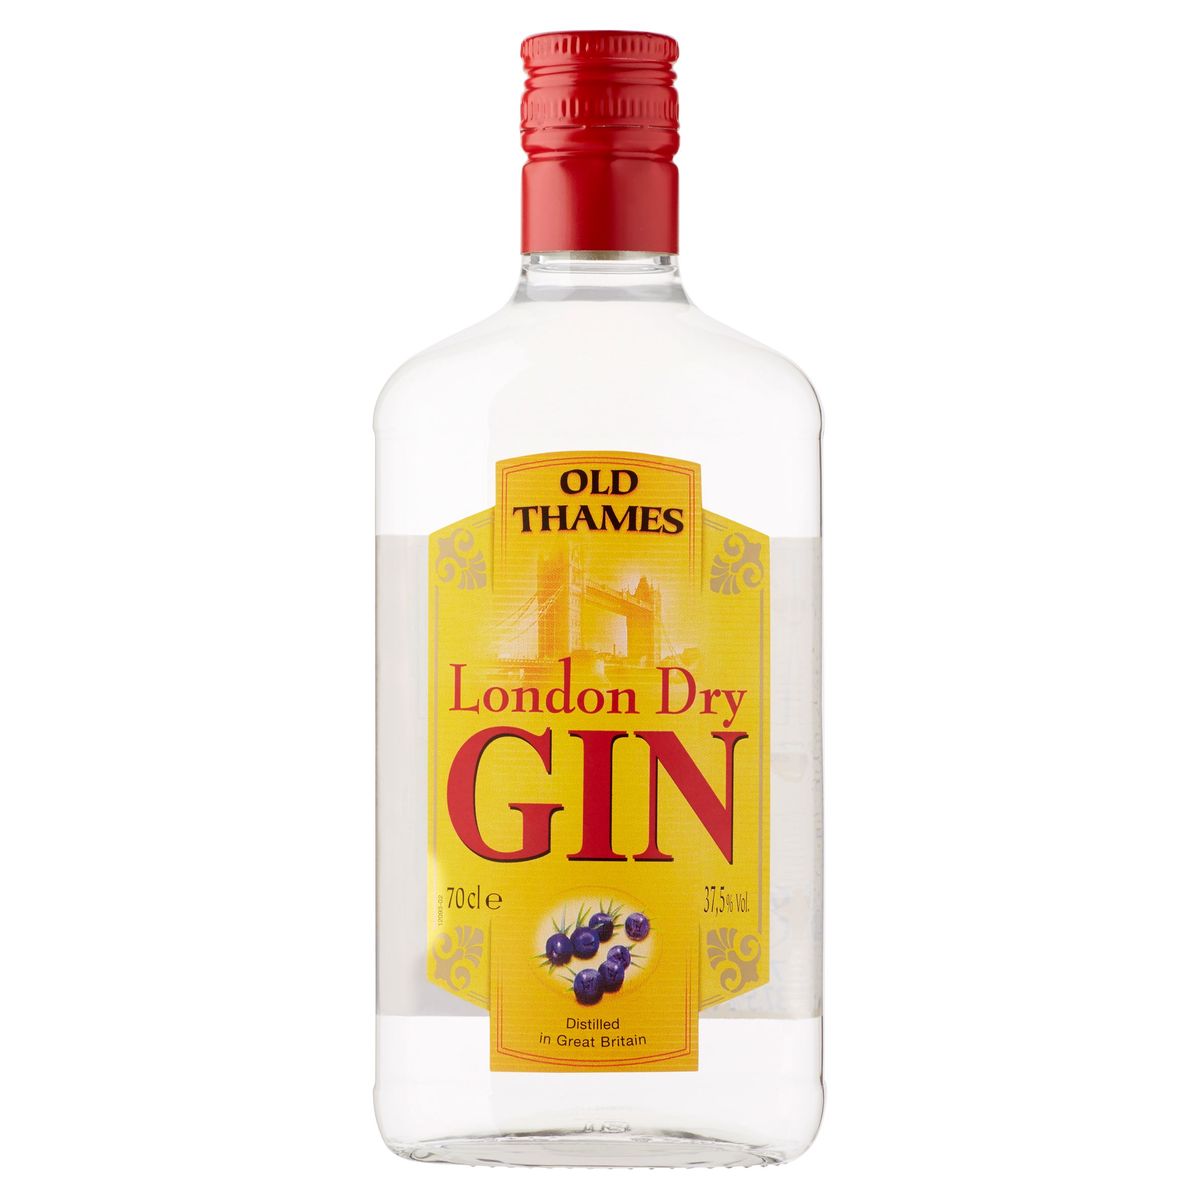 Old Thames London Dry Gin 70 cl